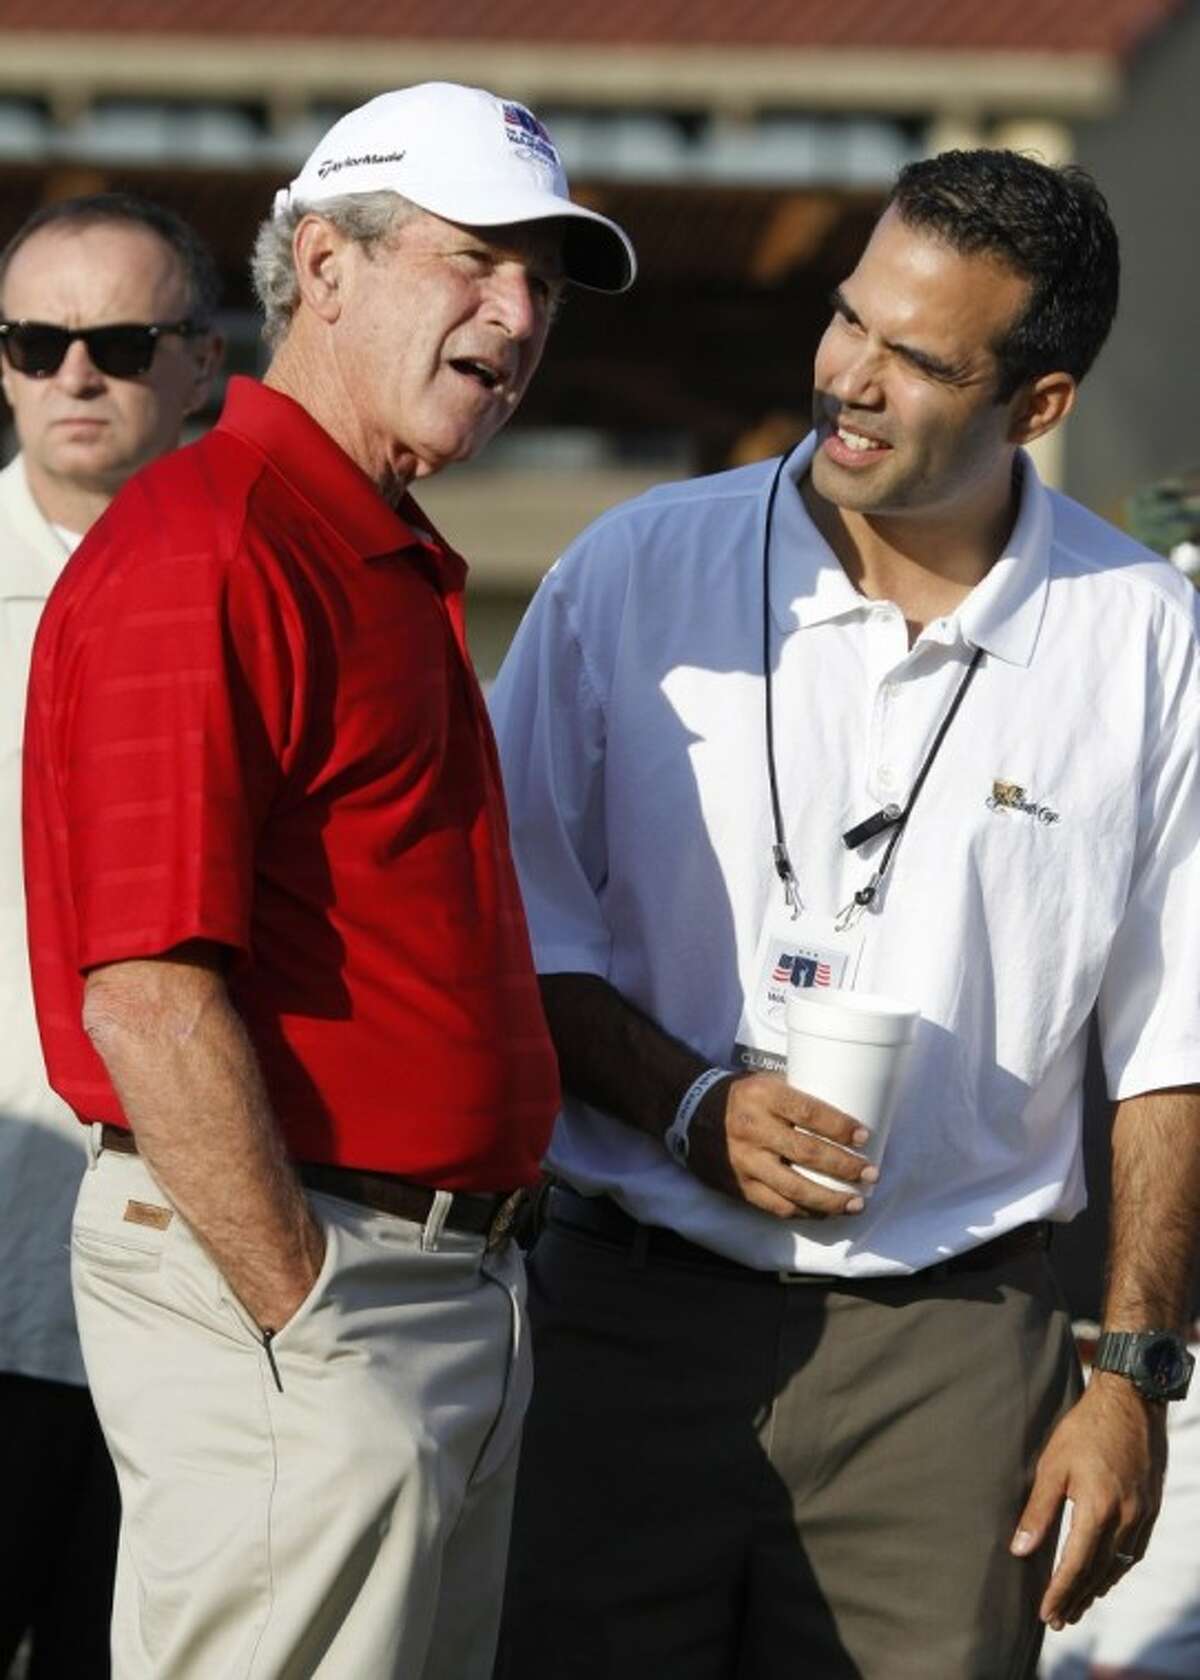 Former President George W. Bush, left, talks with talks with his nephew George P. Bush during the Bush Center Warrior Open in Irving, Texas, Monday. The Warrior Open is a two-day golf tournament featuring members of the U.S. Armed Forces who were severely wounded during the global war against terrorism.